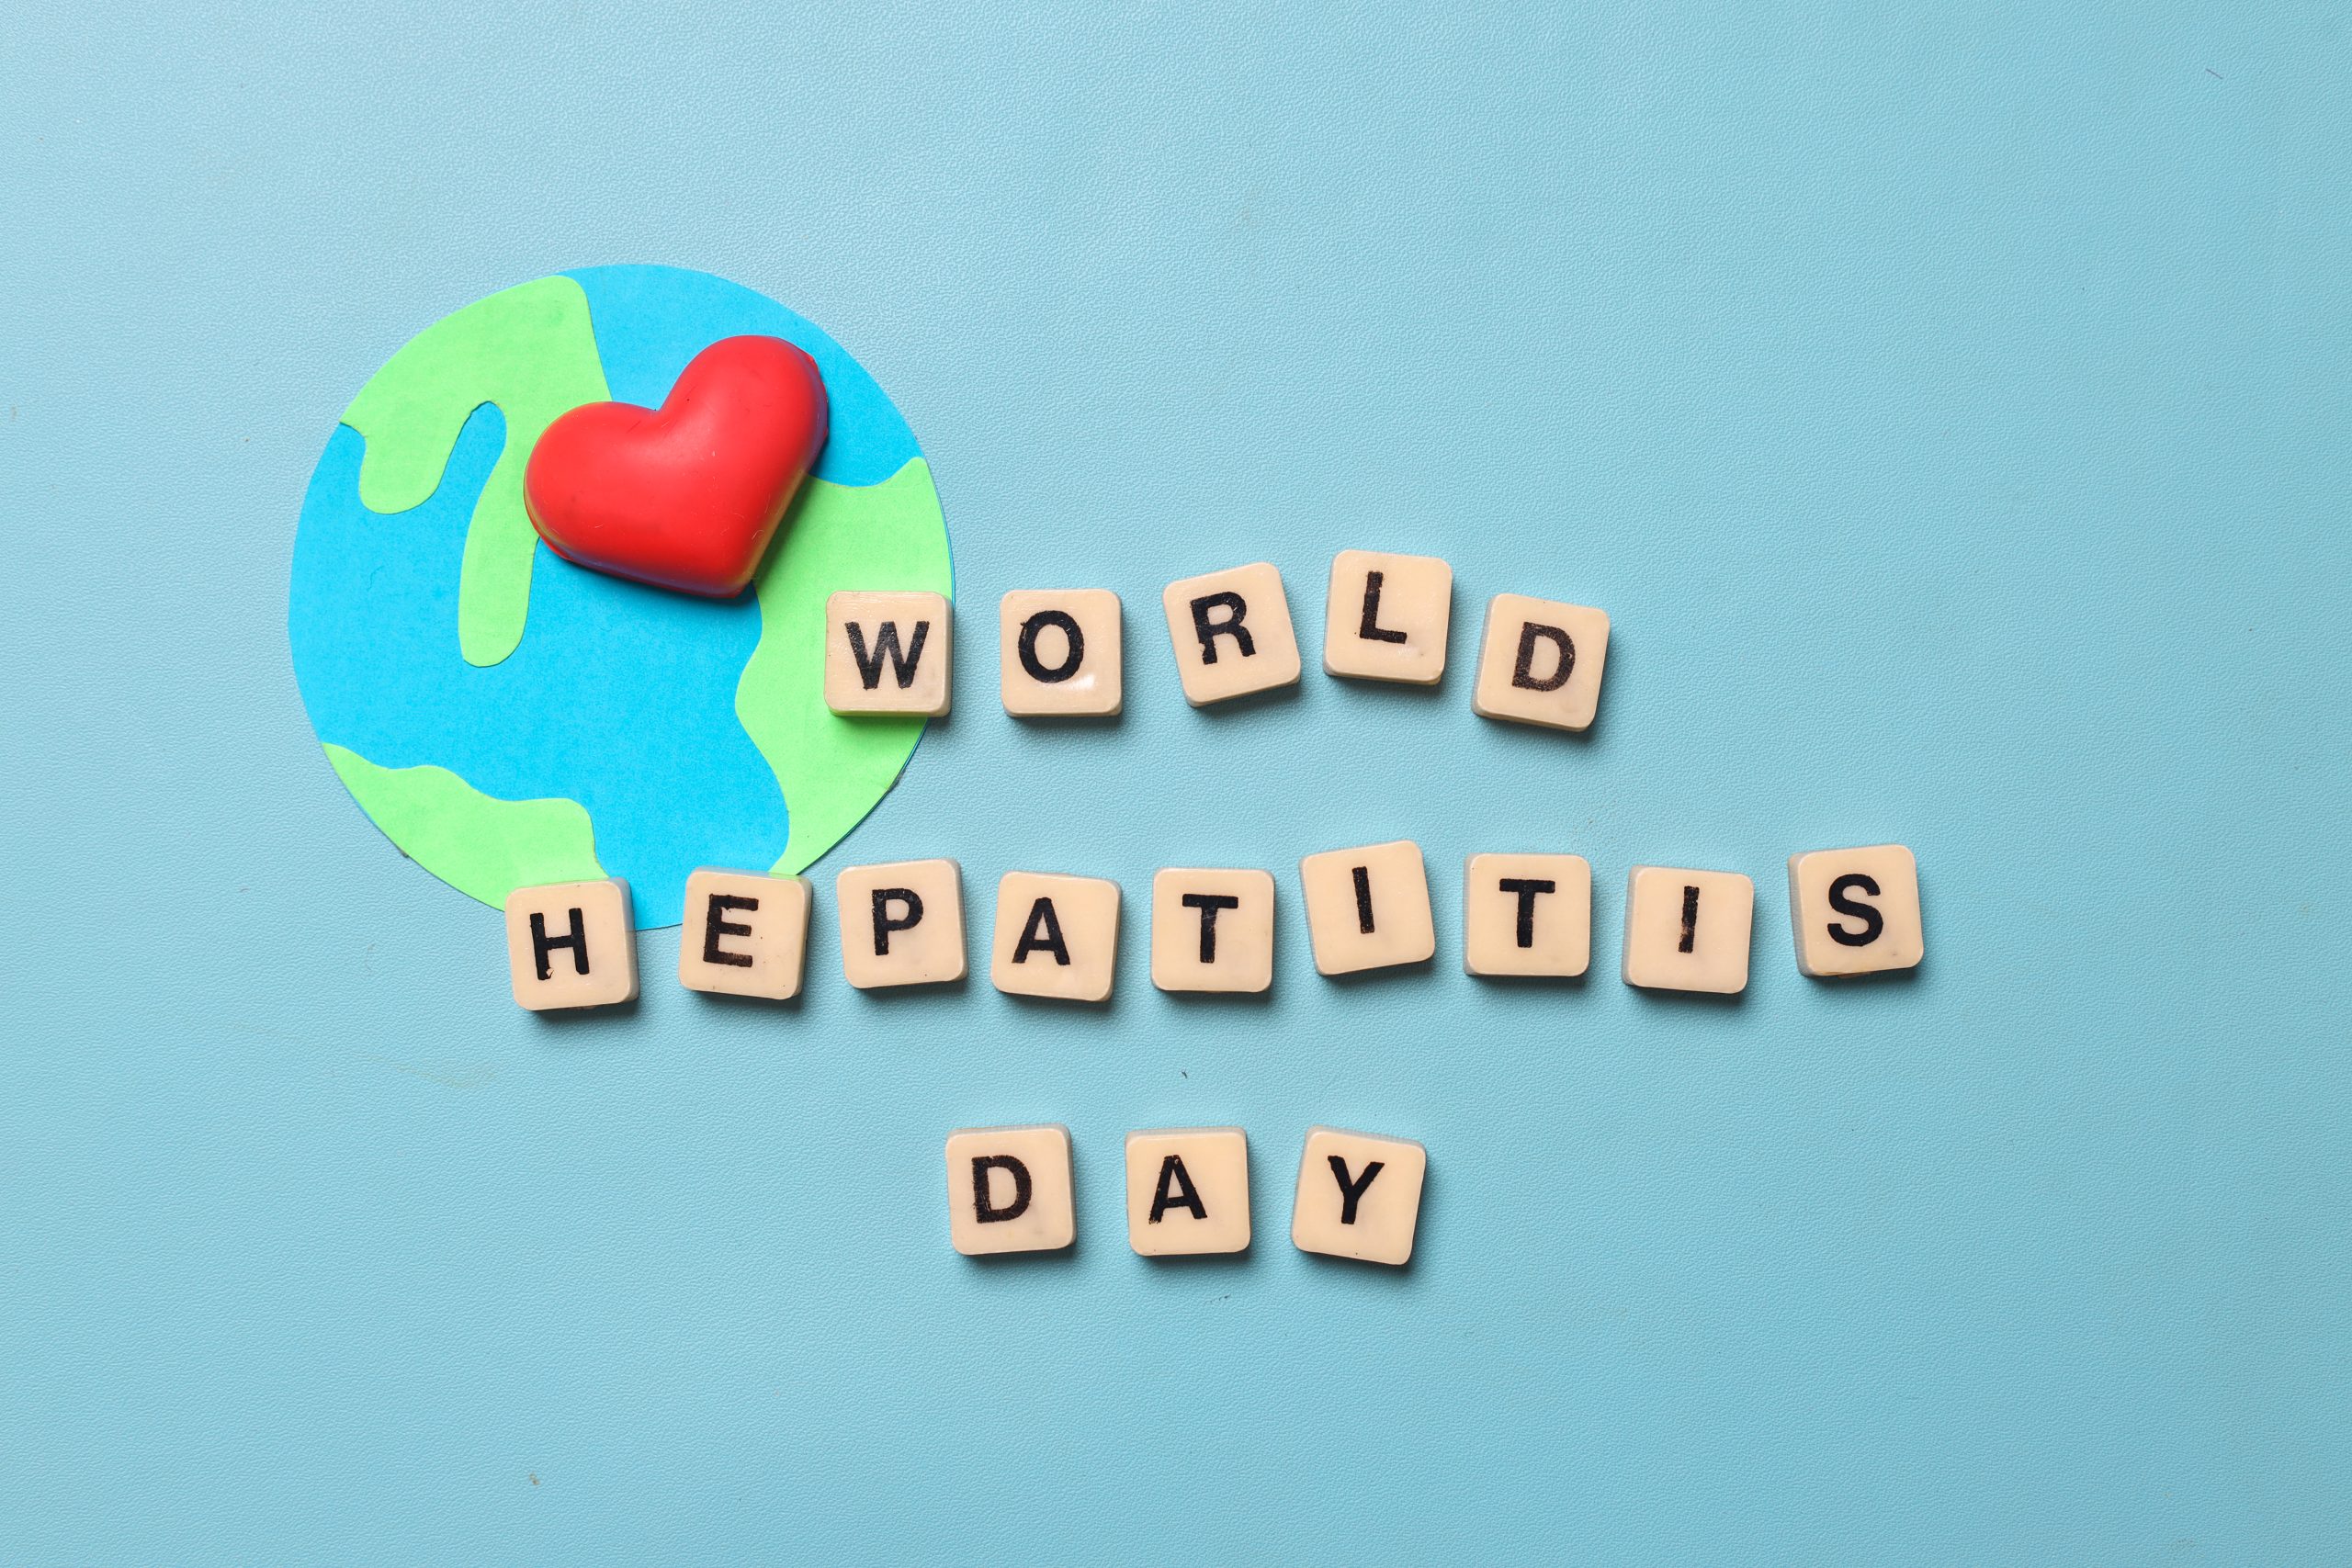 World Hepatitis Day: What You Need To Know